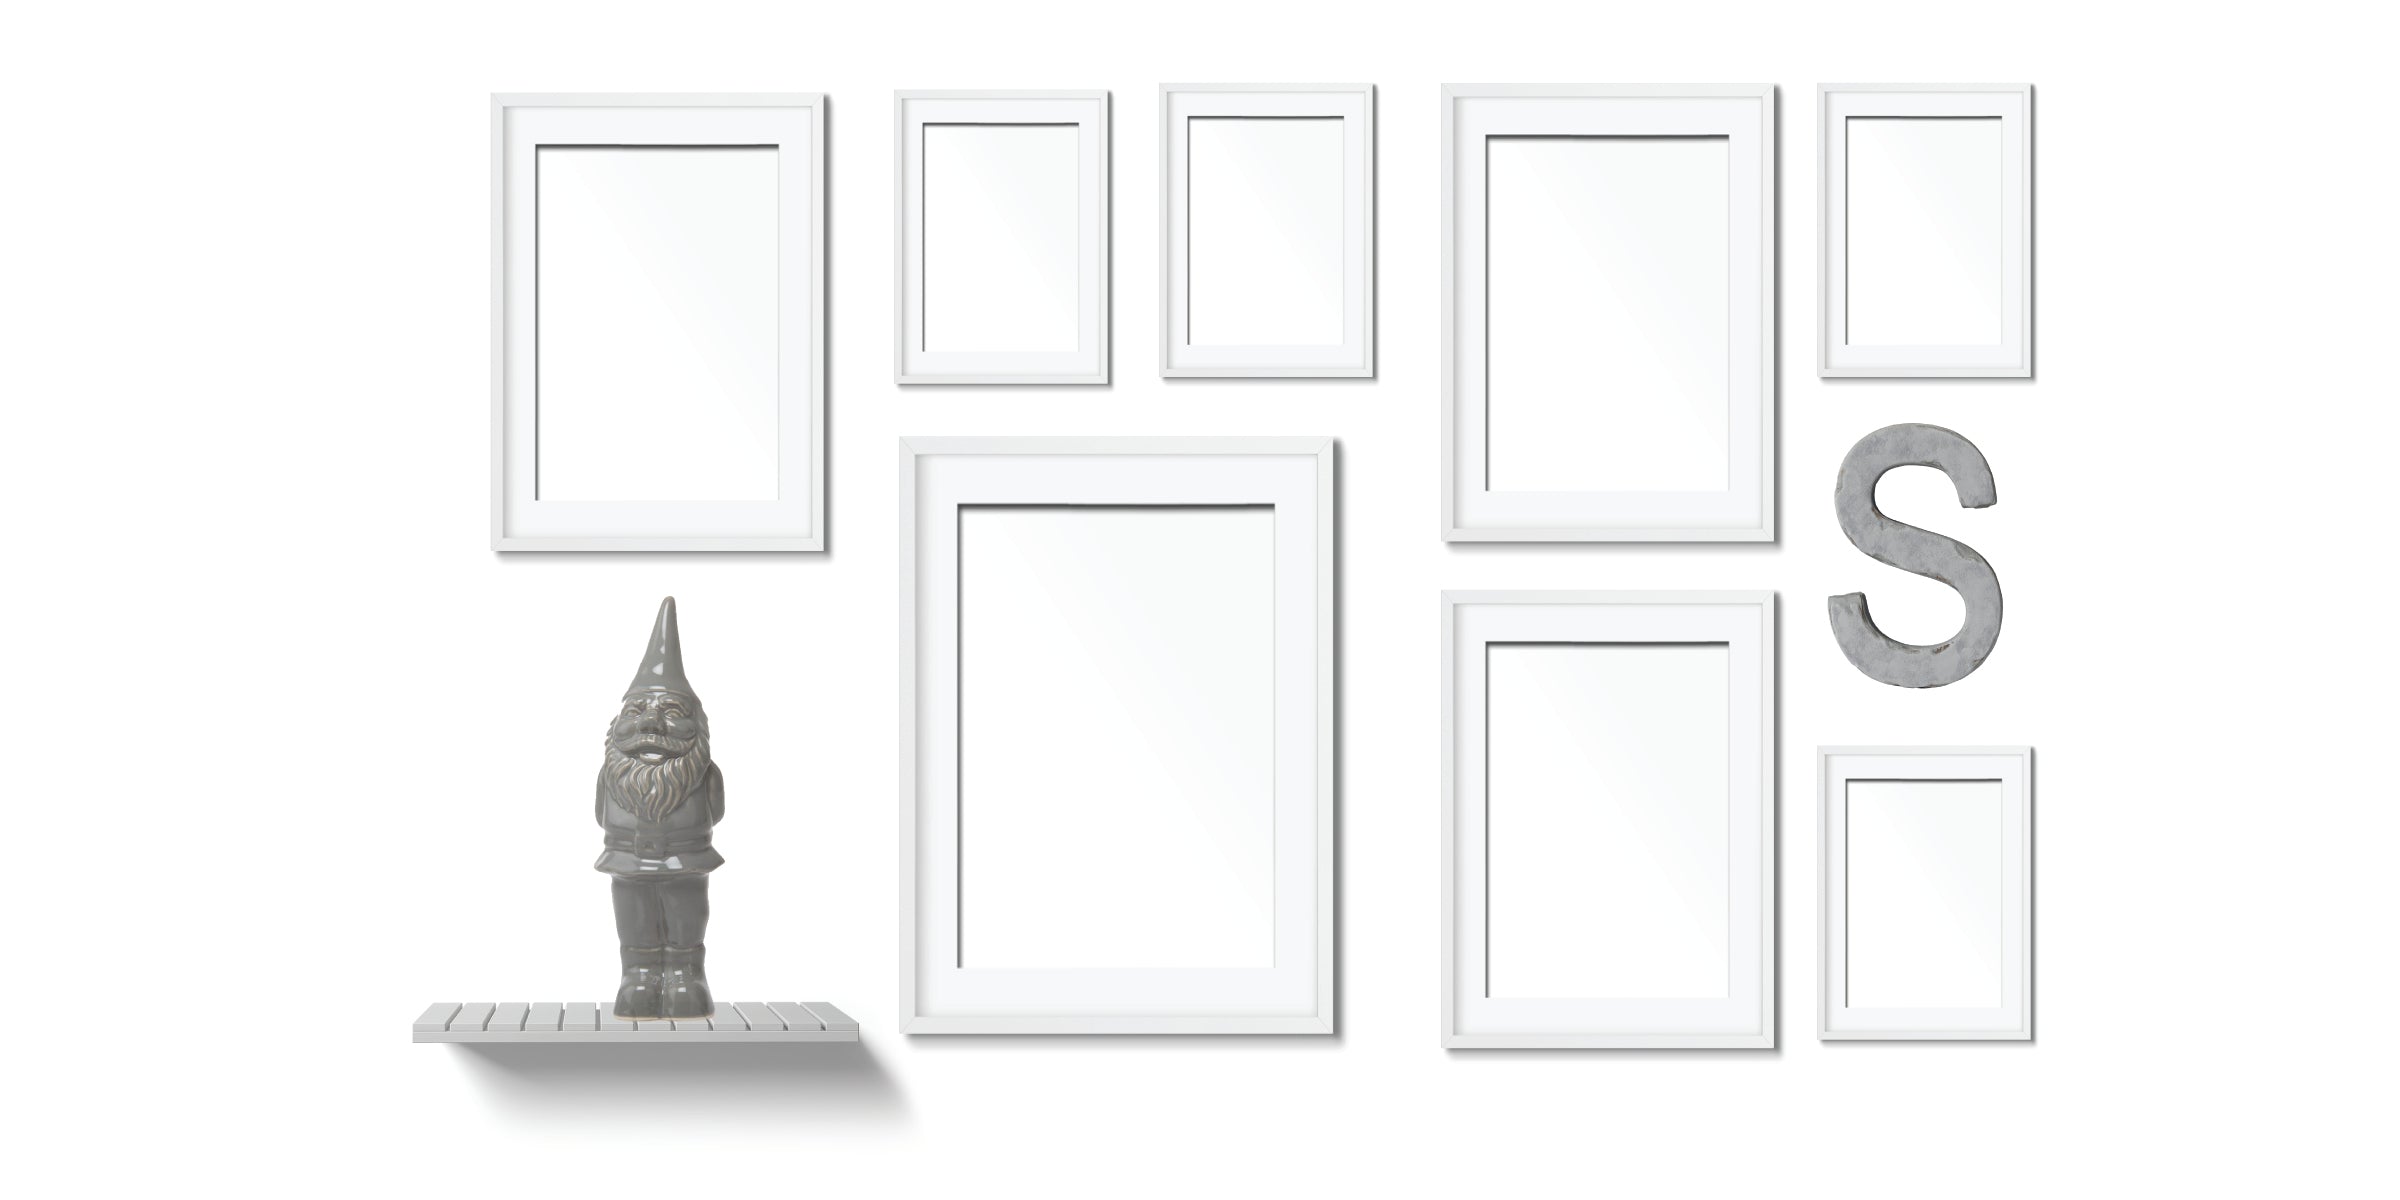 A classic gallery wall layout example